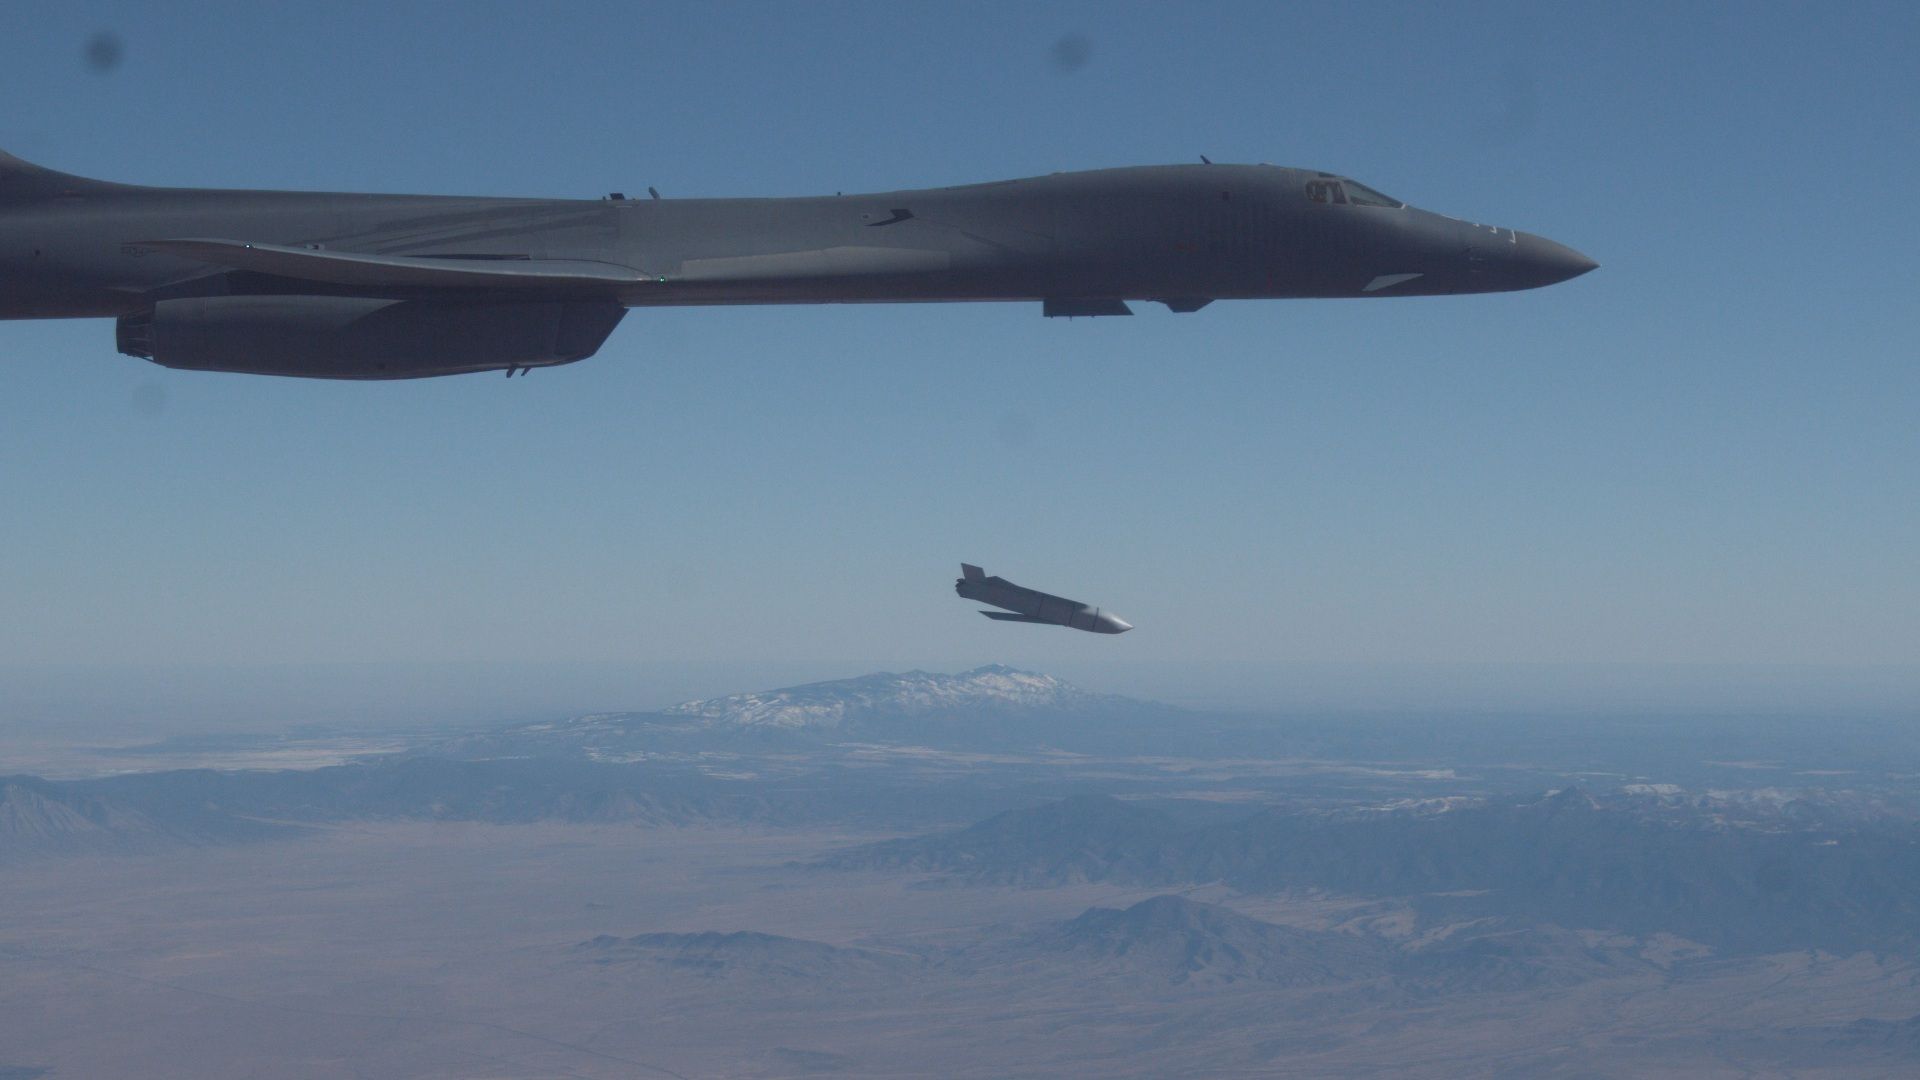 B 1B Lancer Assigned To The 419th Flight Test Squadron 412th Test Wing Releases A Joint Air To Surface Standoff Missile